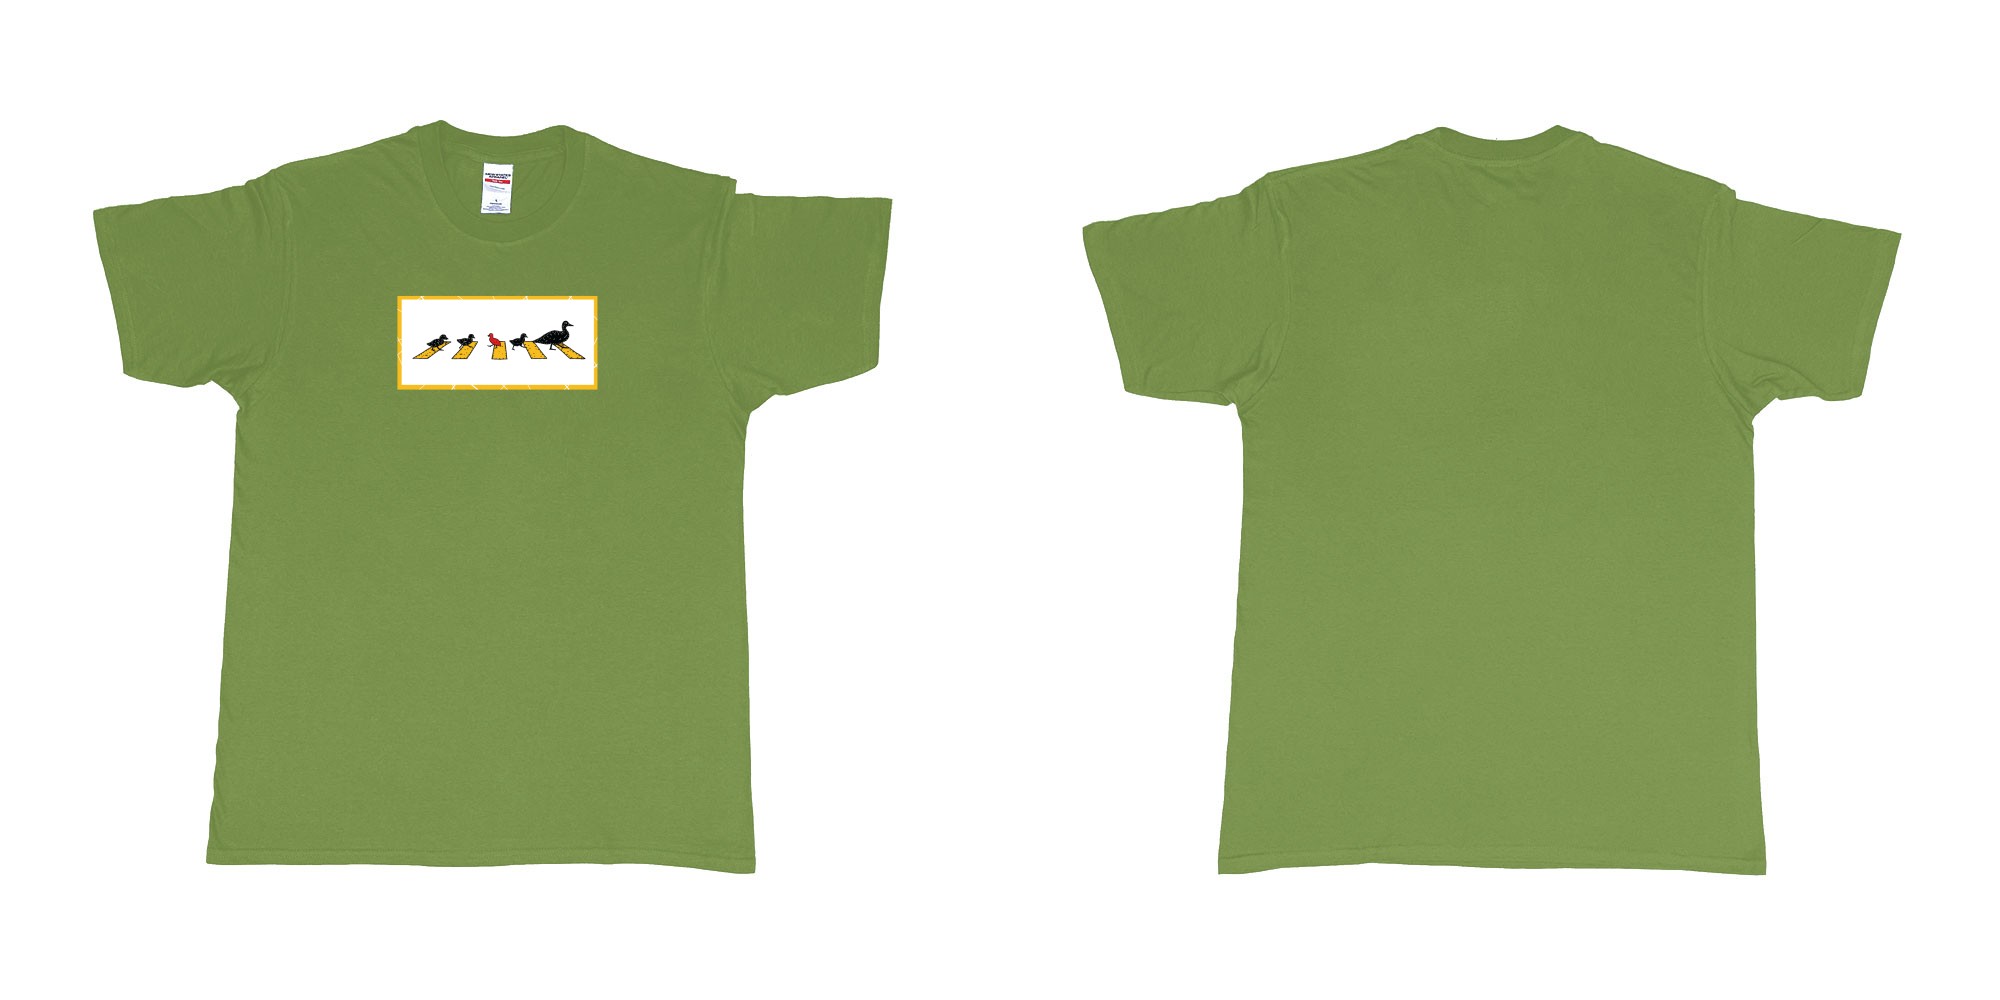 Custom tshirt design 4481 ducks in fabric color military-green choice your own text made in Bali by The Pirate Way